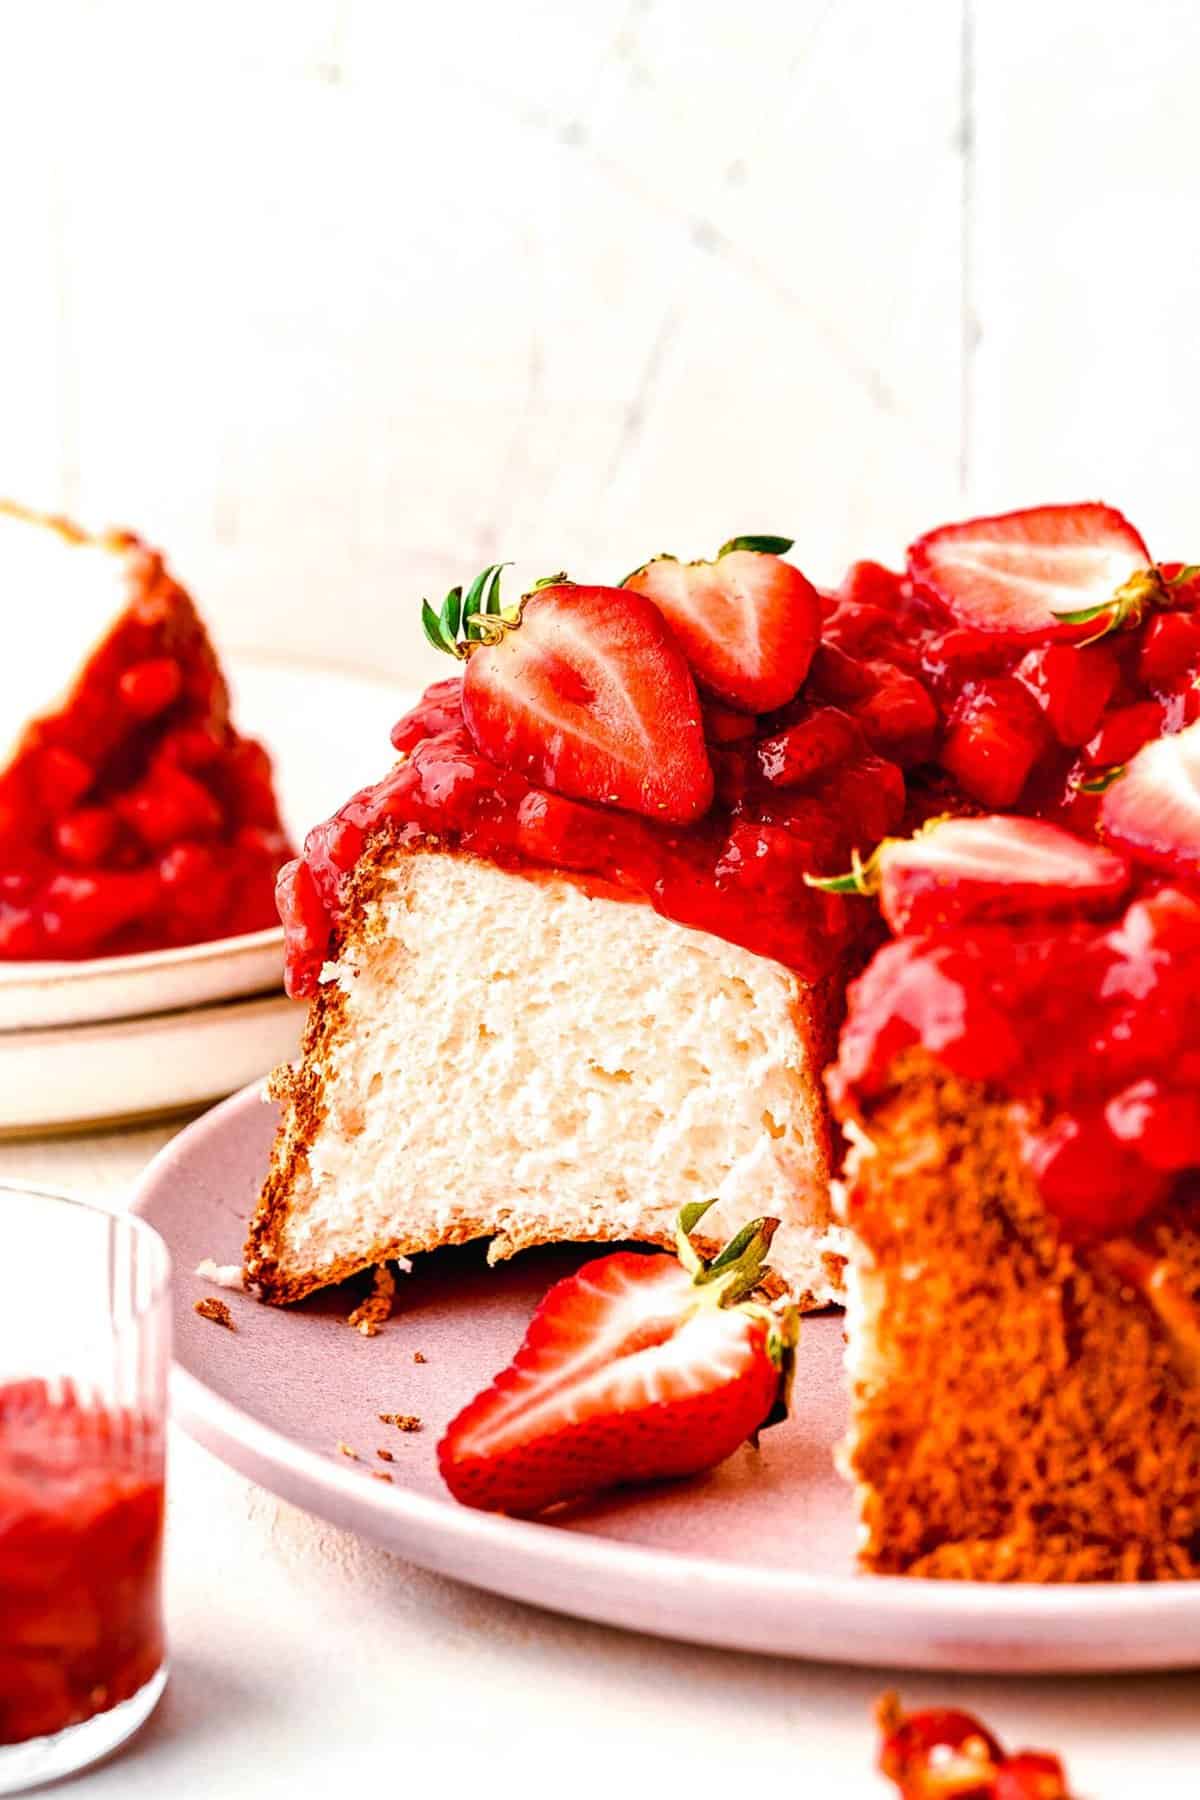 Strawberry angel food cake topped with fresh strawberries with a slice taken out of it.